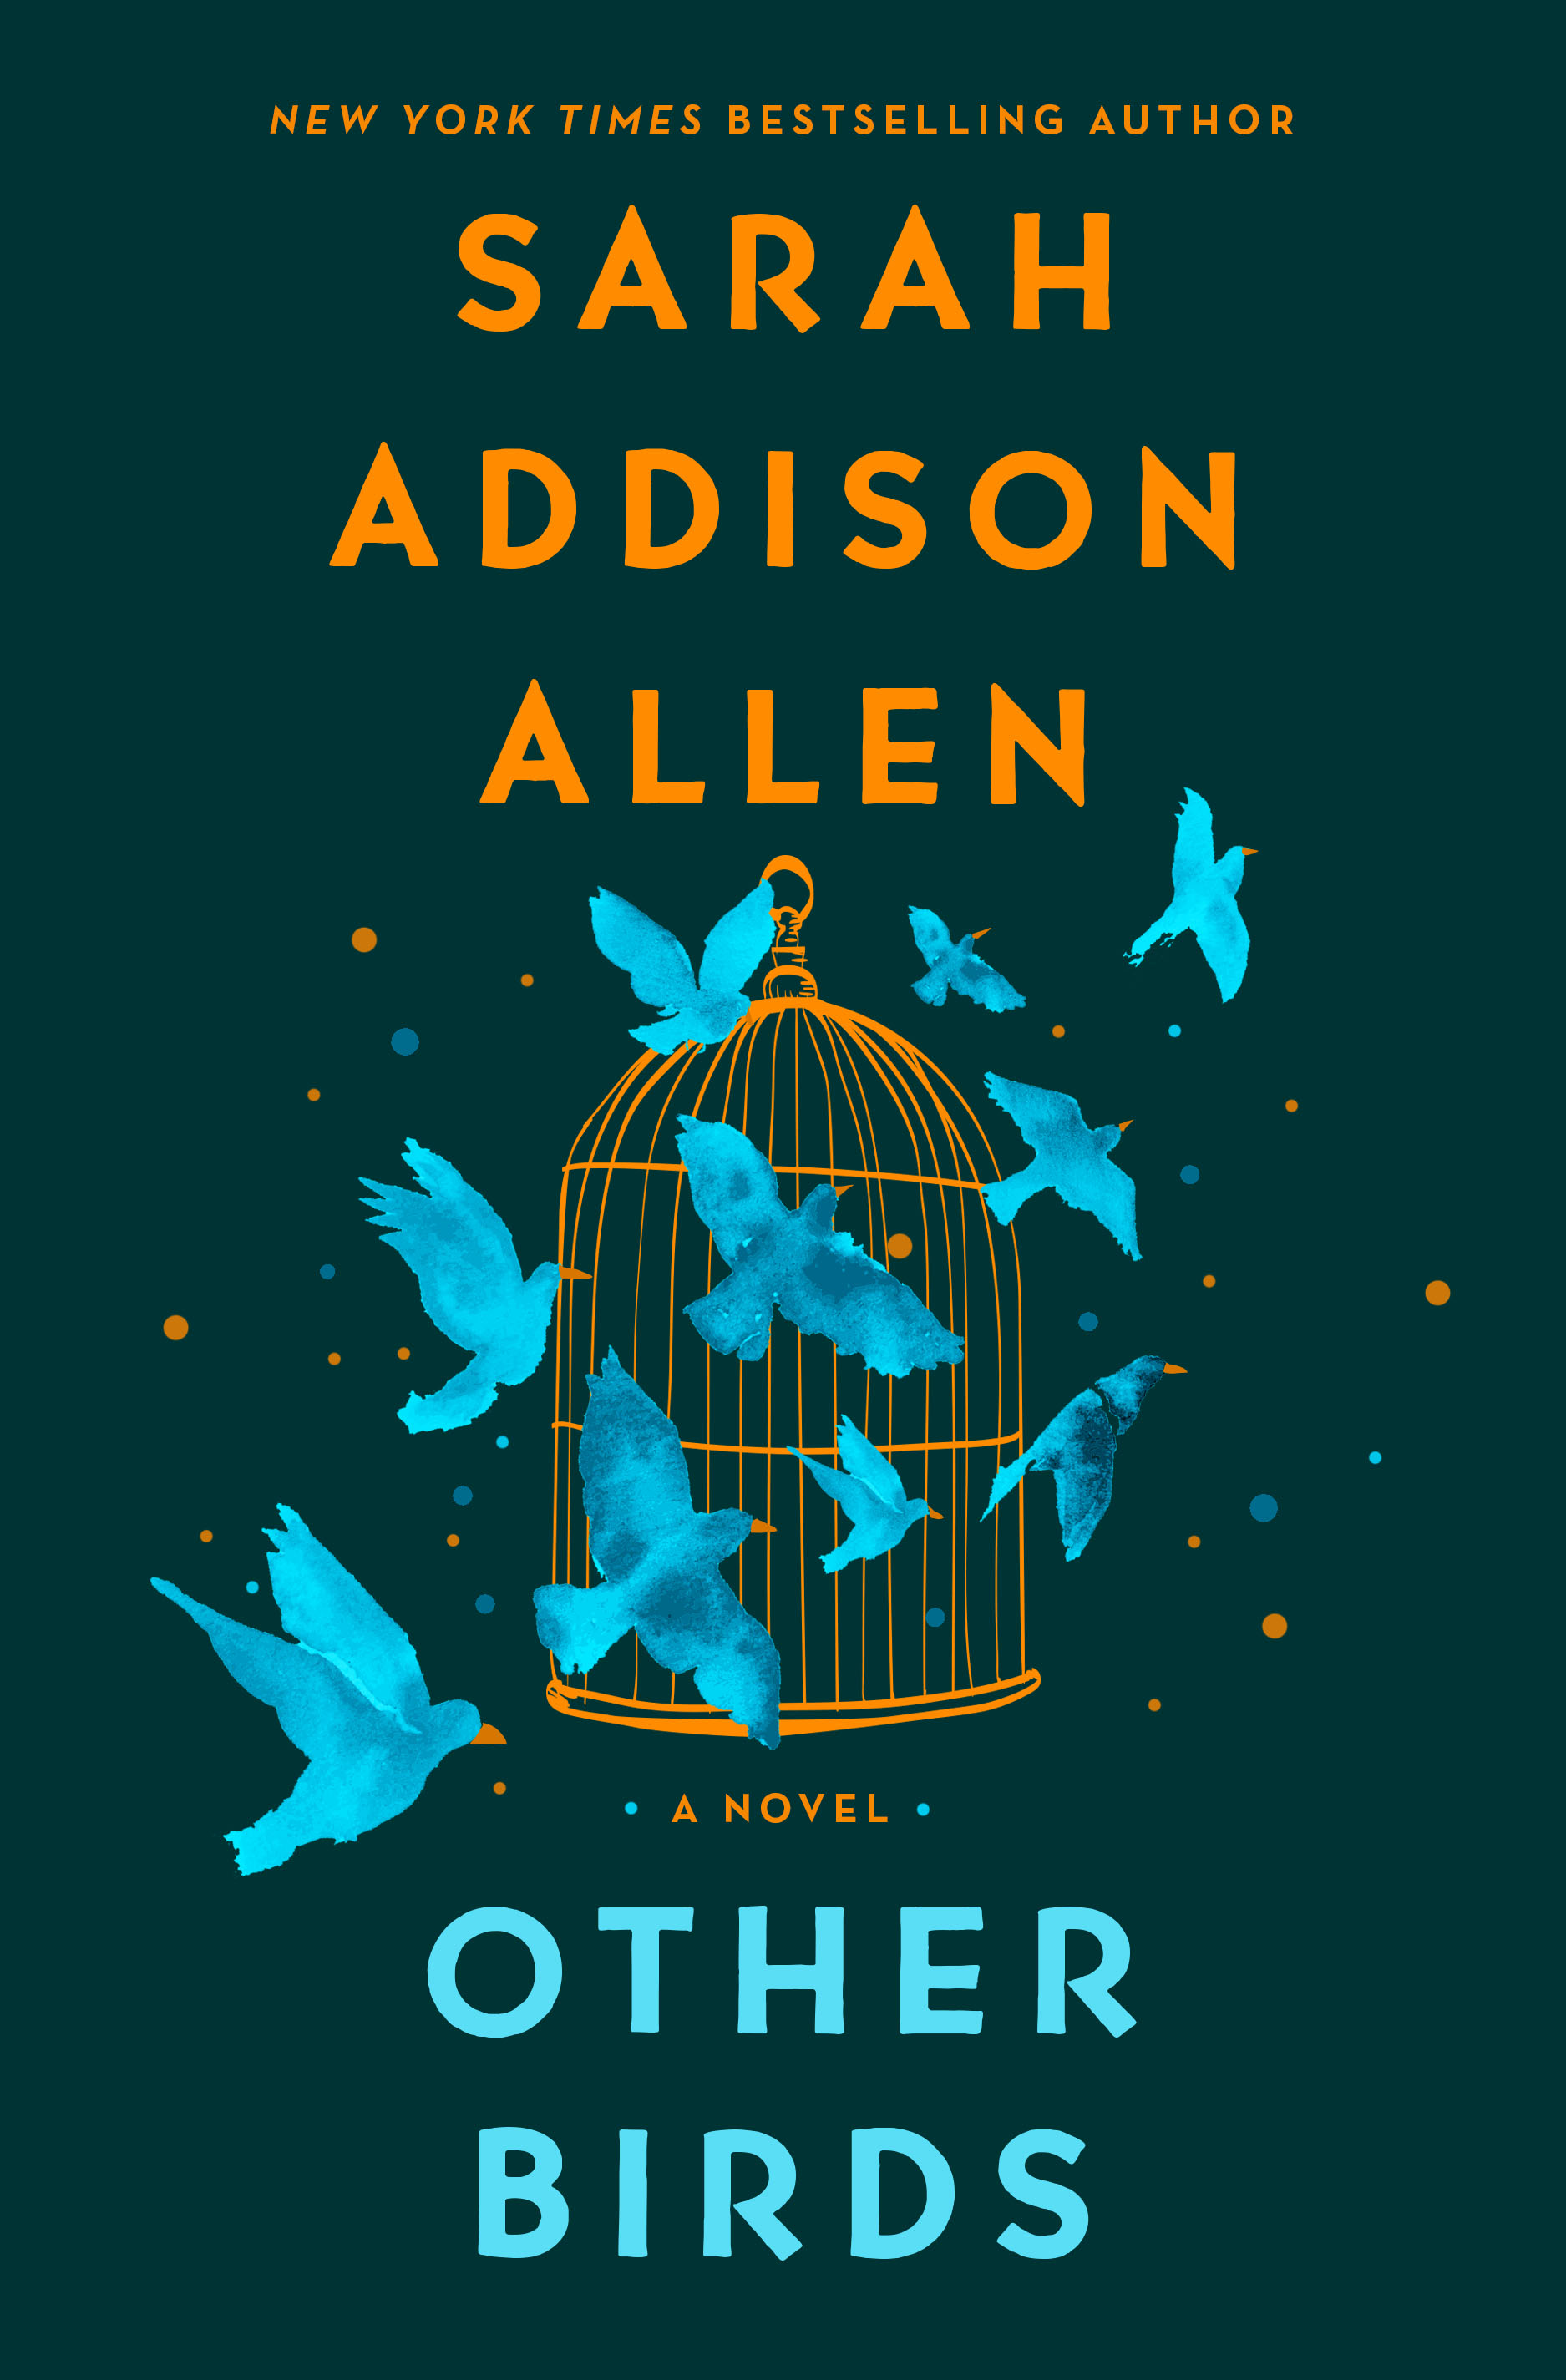 Book cover of Other Birds by Sarah Addison Allen